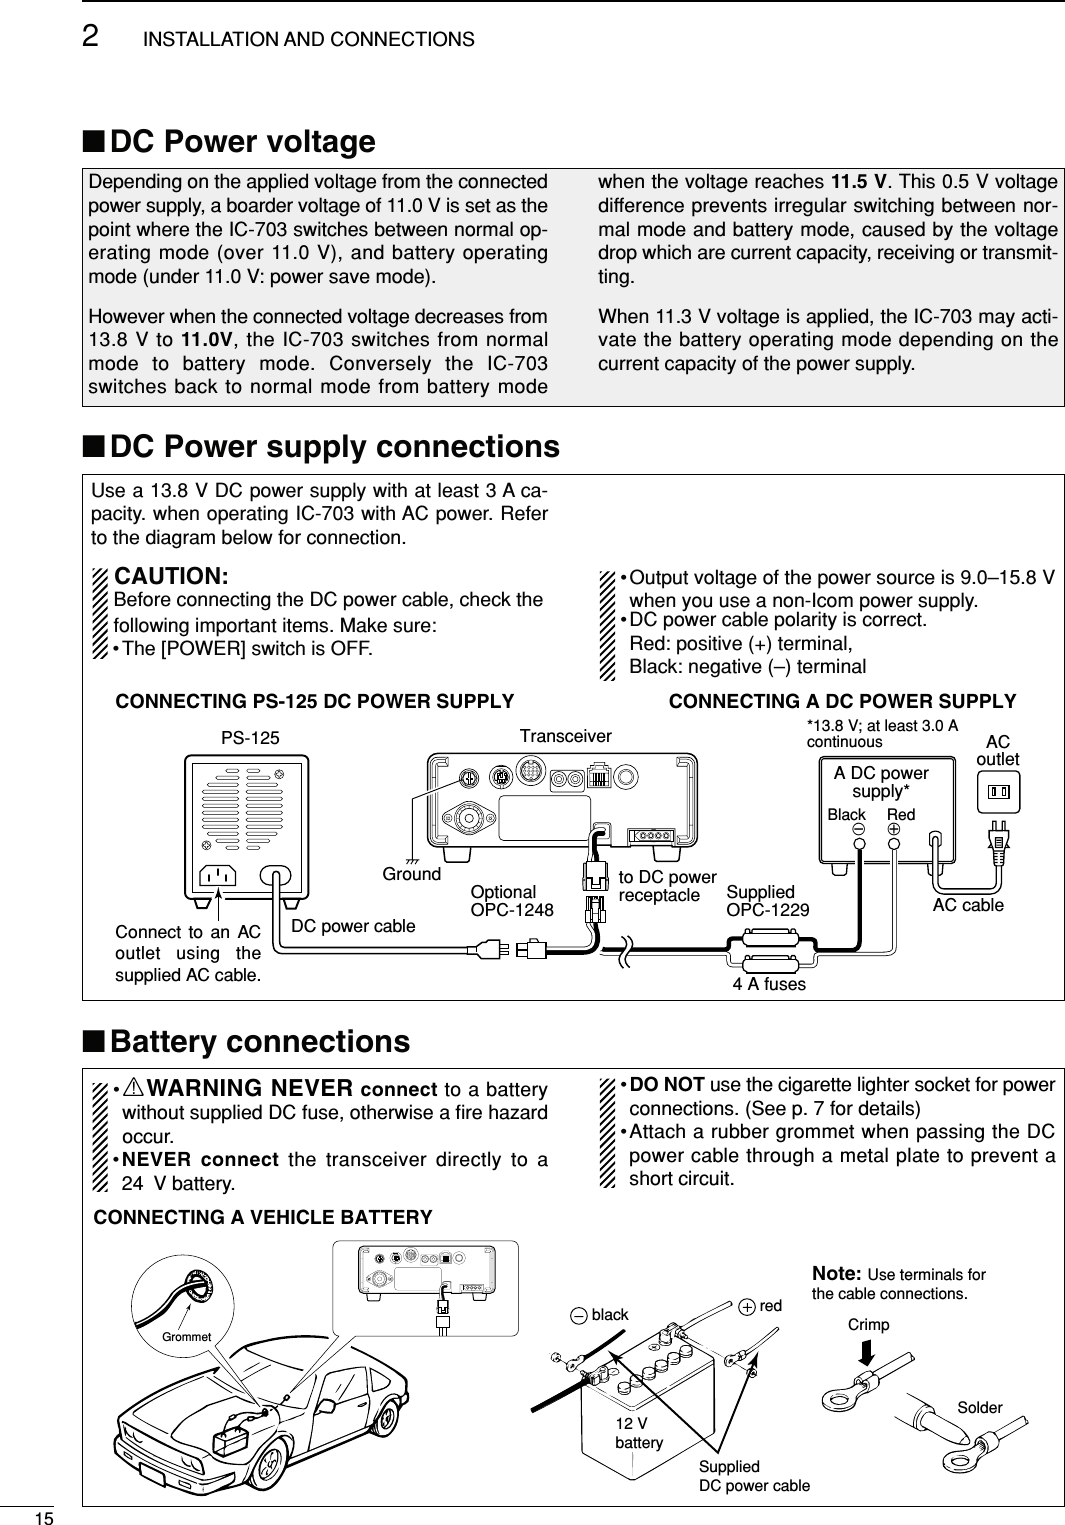 Use a 13.8 V DC power supply with at least 3 A ca-pacity. when operating IC-703 with AC power. Referto the diagram below for connection.CAUTION:Before connecting the DC power cable, check thefollowing important items. Make sure:• The [POWER] switch is OFF.•Output voltage of the power source is 9.0–15.8 Vwhen you use a non-Icom power supply.•DC power cable polarity is correct.Red: positive (+) terminal, Black: negative (–) terminal■DC Power supply connections152INSTALLATION AND CONNECTIONS■Battery connections■DC Power voltageDepending on the applied voltage from the connectedpower supply, a boarder voltage of 11.0 V is set as thepoint where the IC-703 switches between normal op-erating mode (over 11.0 V), and battery operatingmode (under 11.0 V: power save mode).However when the connected voltage decreases from13.8 V to 11.0V, the IC-703 switches from normalmode to battery mode. Conversely the IC-703switches back to normal mode from battery modewhen the voltage reaches 11.5 V. This 0.5 V voltagedifference prevents irregular switching between nor-mal mode and battery mode, caused by the voltagedrop which are current capacity, receiving or transmit-ting.When 11.3 V voltage is applied, the IC-703 may acti-vate the battery operating mode depending on thecurrent capacity of the power supply.AC cableACoutletA DC powersupply**13.8 V; at least 3.0 AcontinuousBlack _ Red+CONNECTING A DC POWER SUPPLYCONNECTING PS-125 DC POWER SUPPLYPS-125DC power cableGround4 A fusesTransceiverto DC powerreceptacle SuppliedOPC-1229OptionalOPC-1248Connect to an AC outlet using the supplied AC cable.•RWARNING NEVER connect to a batterywithout supplied DC fuse, otherwise a ﬁre hazardoccur.•NEVER connect the transceiver directly to a24 V battery.•DO NOT use the cigarette lighter socket for powerconnections. (See p. 7 for details)•Attach a rubber grommet when passing the DCpower cable through a metal plate to prevent ashort circuit.GrommetCONNECTING A VEHICLE BATTERYNote: Use terminals forthe cable connections.CrimpSolderSuppliedDC power cableredblack12 Vbattery